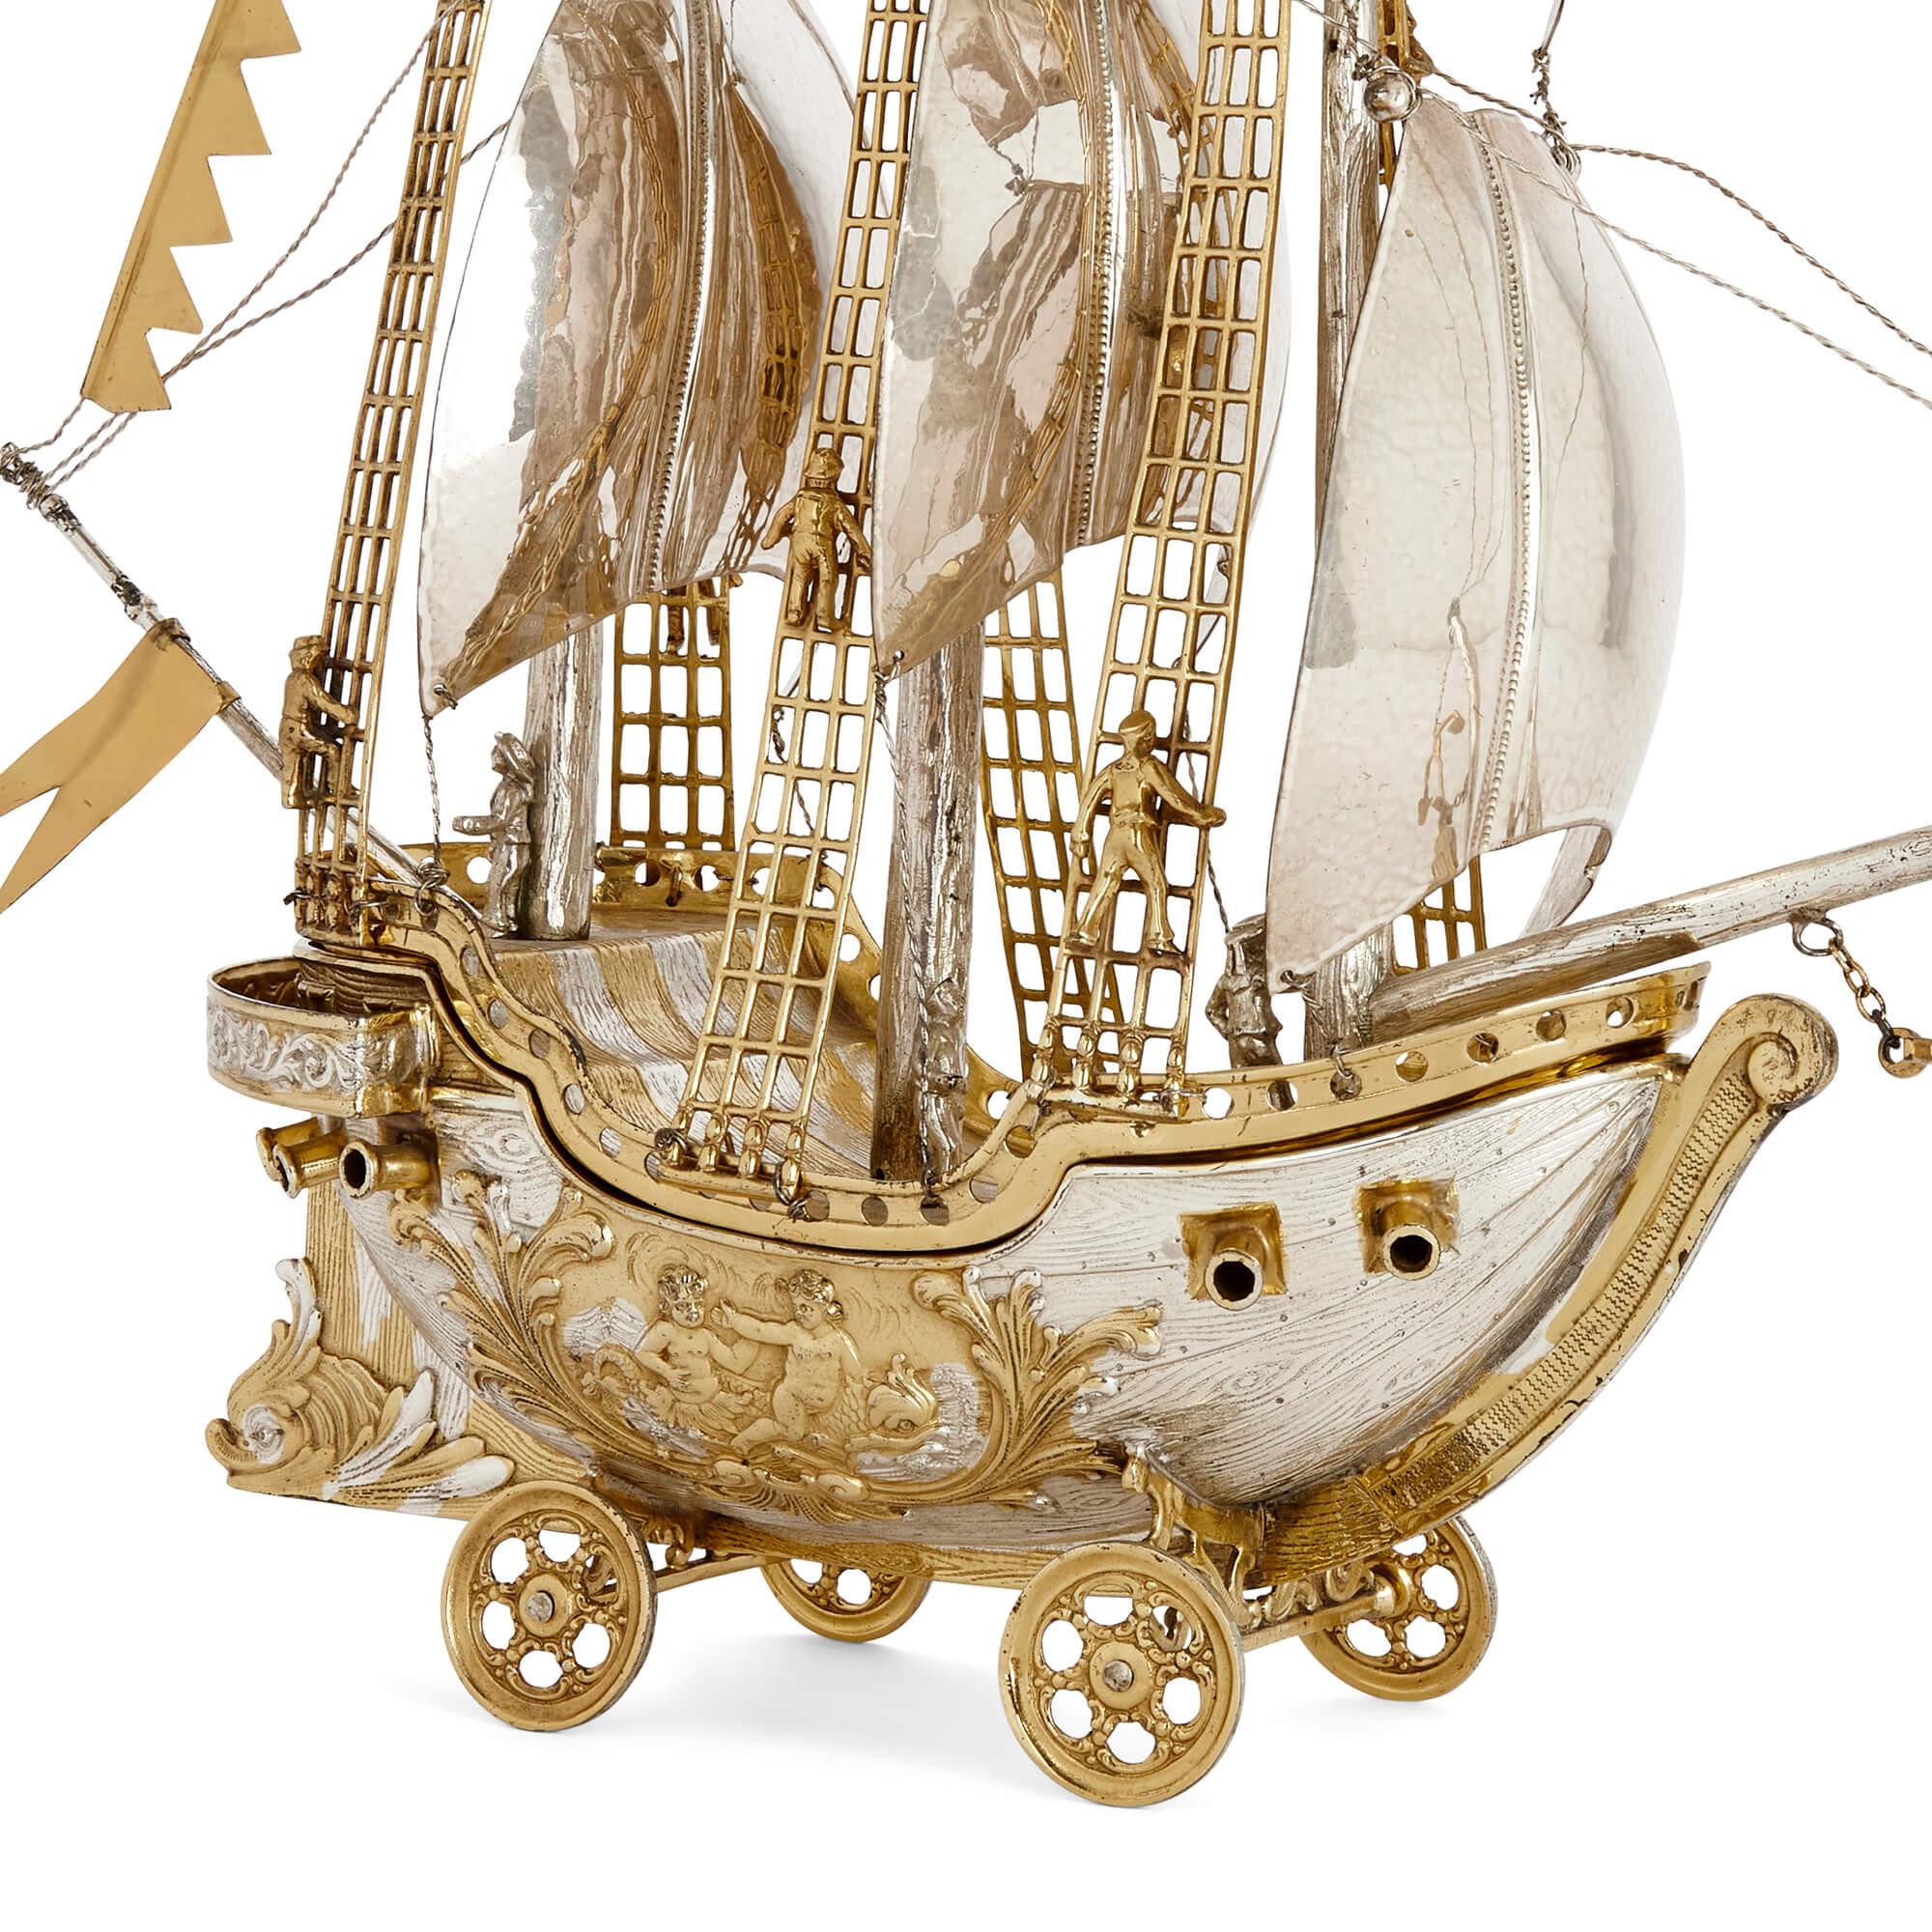 European Silver and Silver Gilt Nef Sailing Ship For Sale